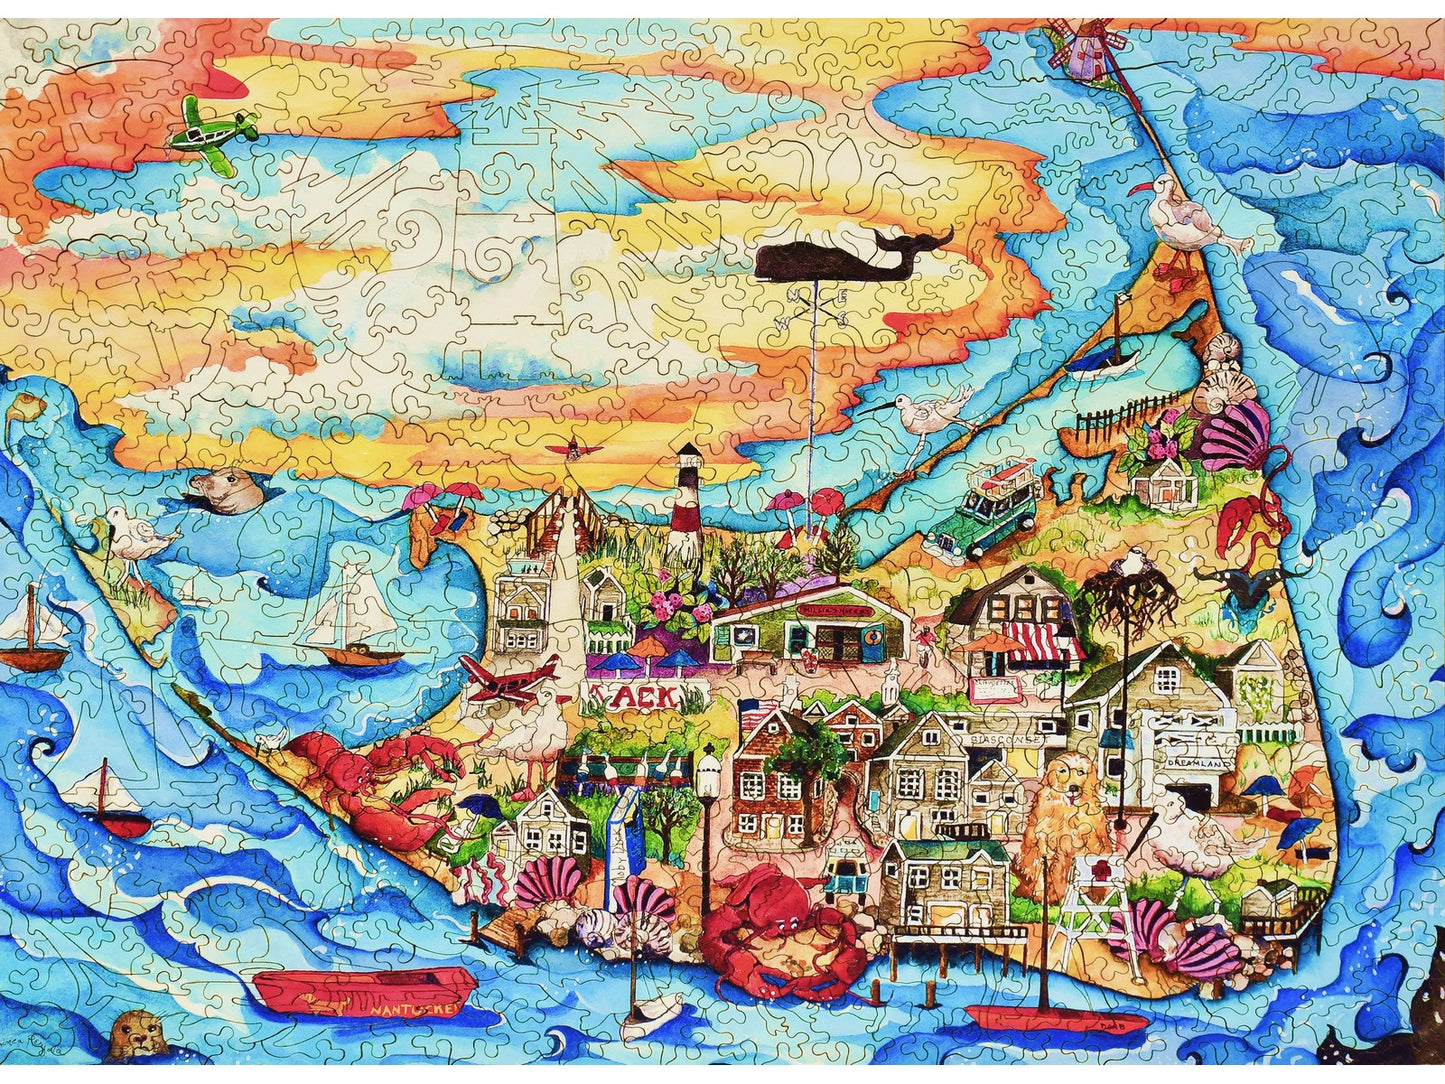 The front of the puzzle, Nantucket, which shows an island with a lighthouse.